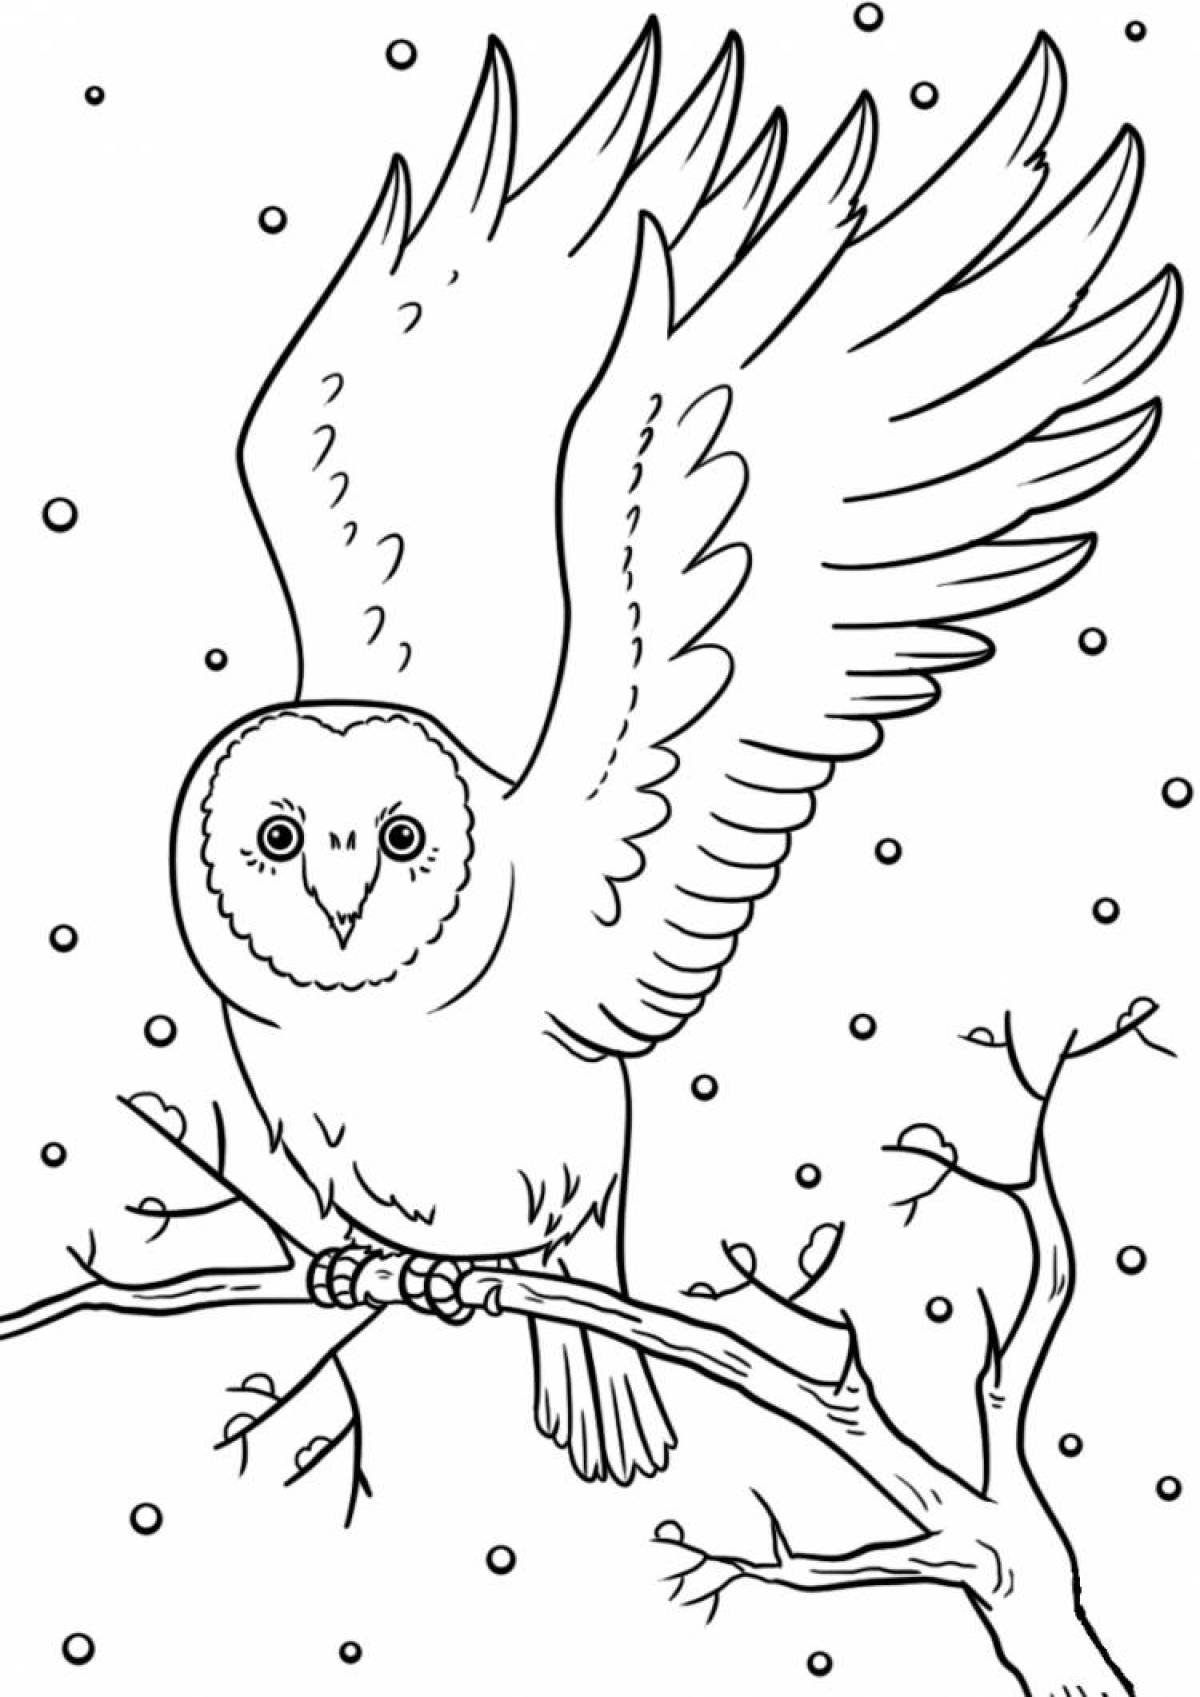 Shiny winter birds coloring page